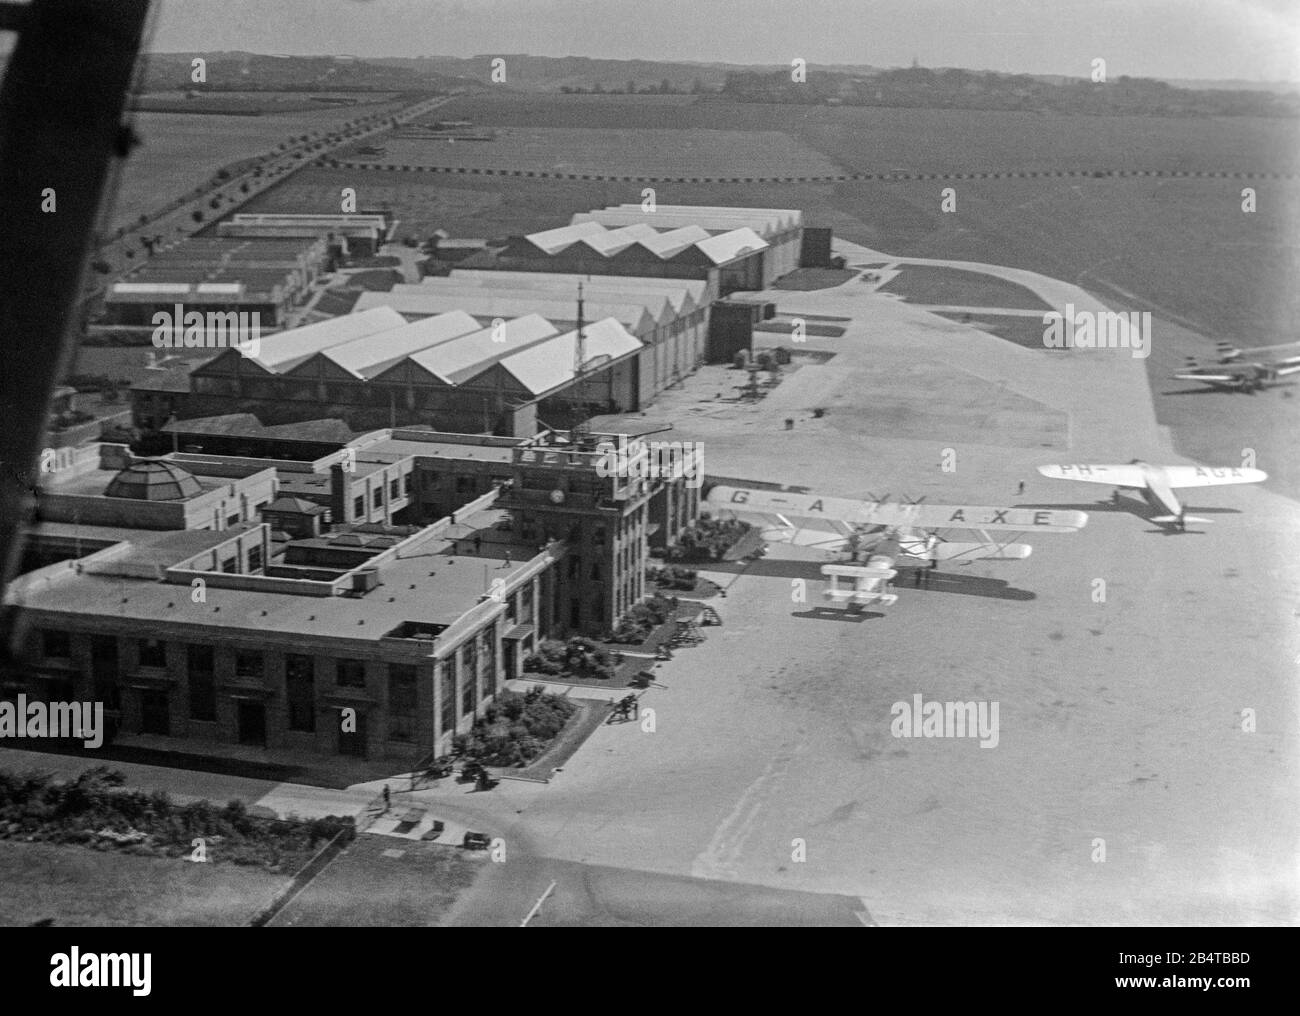 A vintage 1935 aerial photograph of Croydon Airport, aerodrome, near London, England. Photo shows an Imperial Airways Handley Page HP. 42, G-AAXE, and a Fokker F.IX, PH-AGA of KLM. Various Airport buildings and hangars can also be seen. Stock Photo